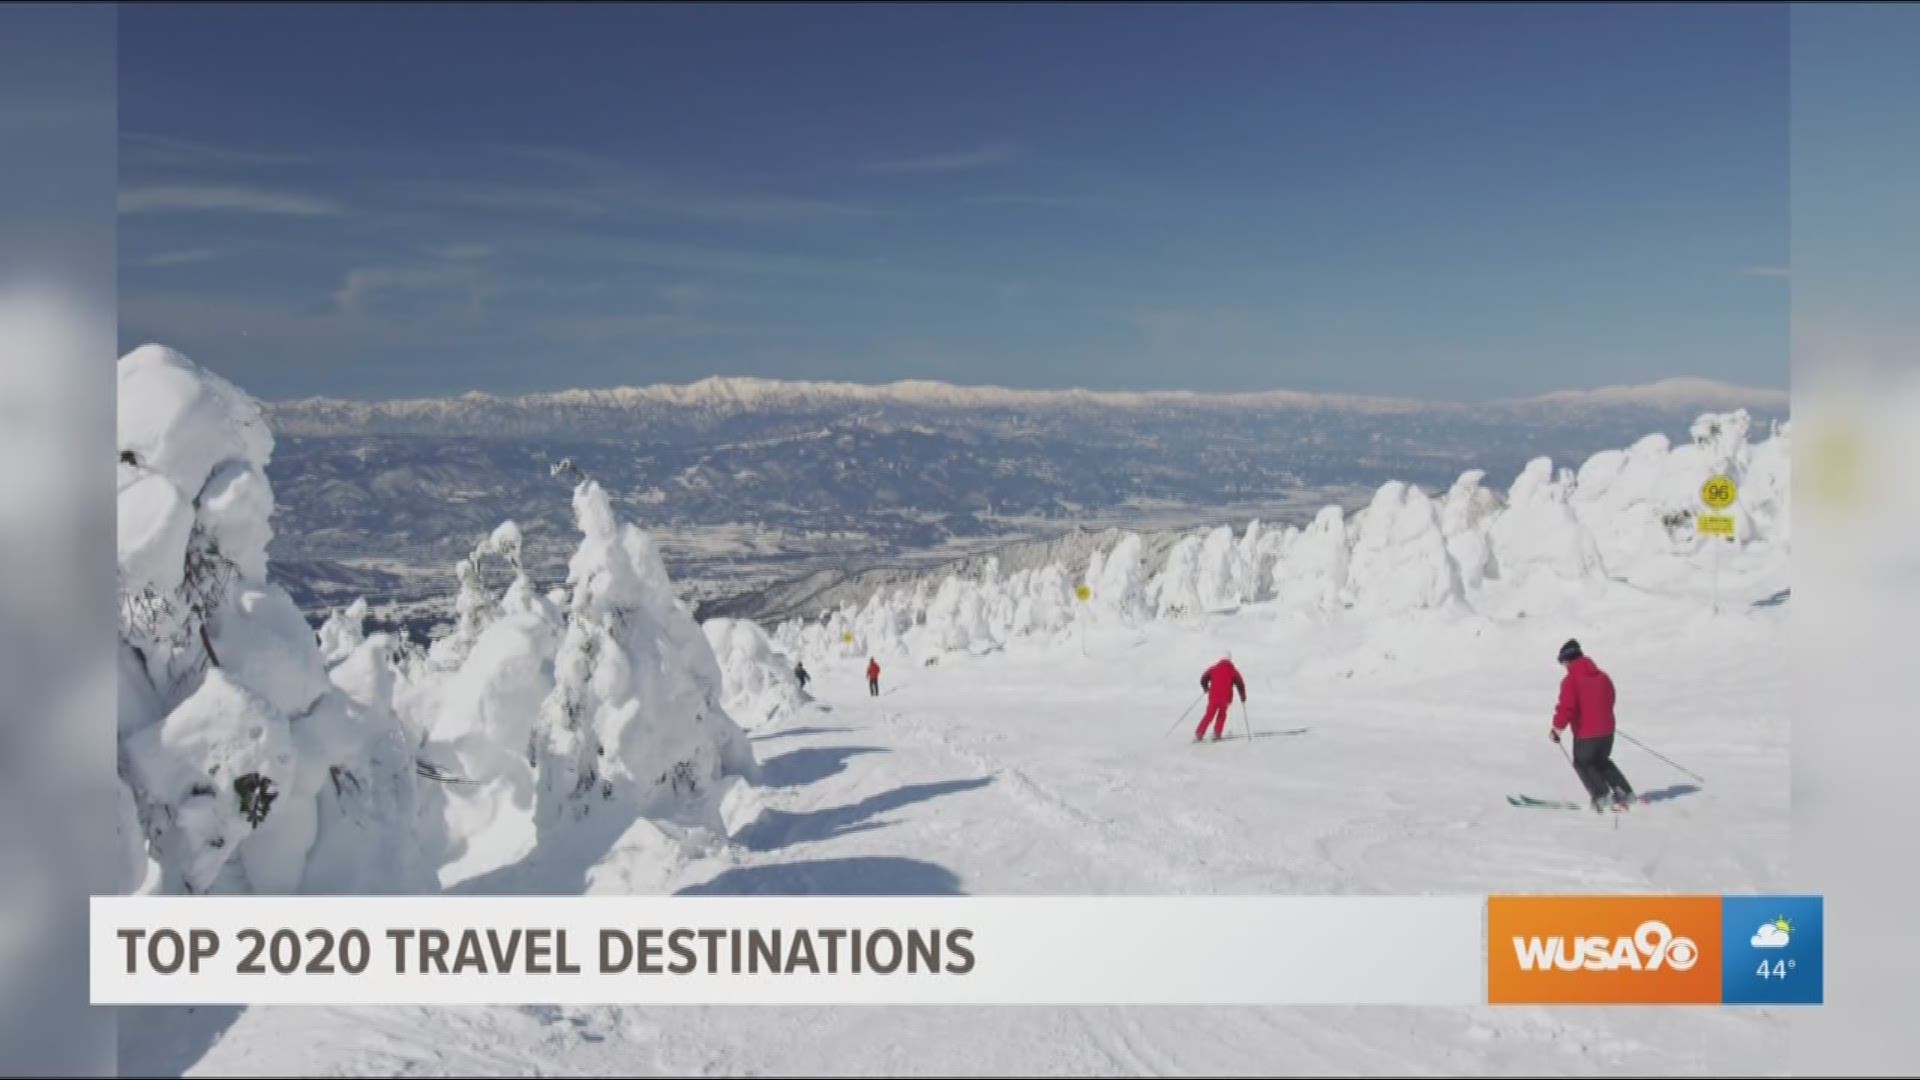 Travel journalist Laura Powell provides the top travel destinations of 2020.